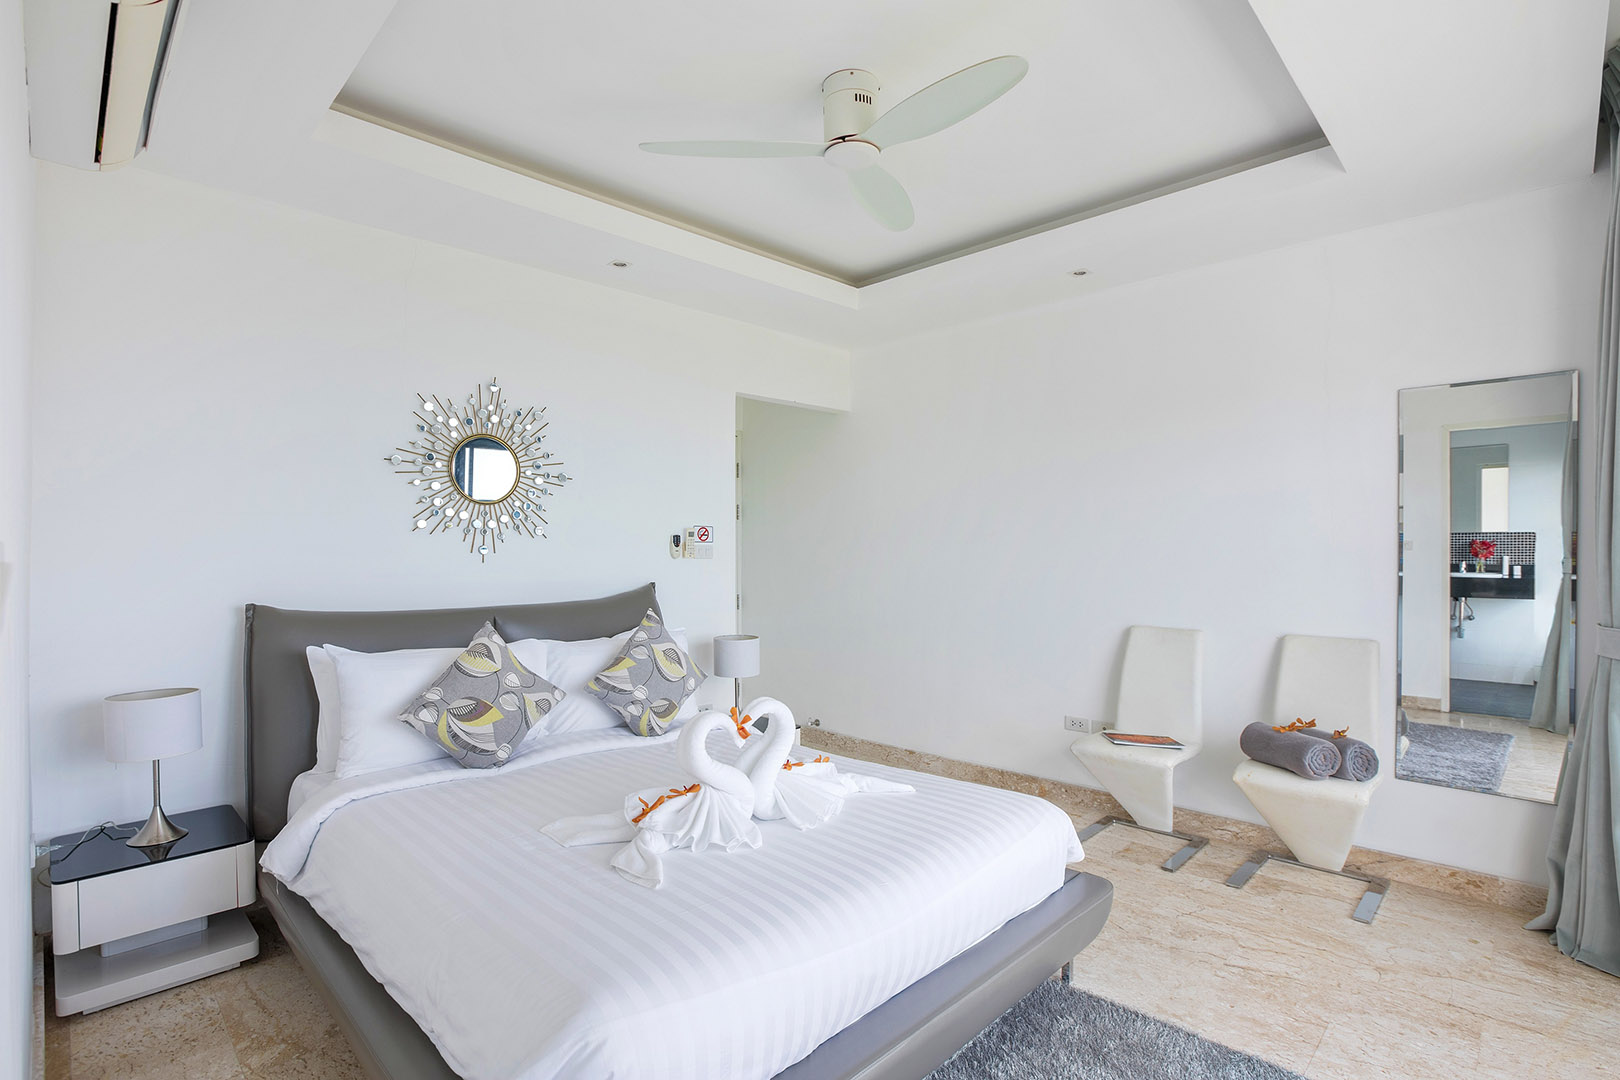 Contemporary 3 Bedroom Seaview Semi-Detached Pool Villa in Chaweng Noi for sale: Contemporary 3 Bedroom Seaview Semi-Detached Pool Villa in Chaweng Noi for sale